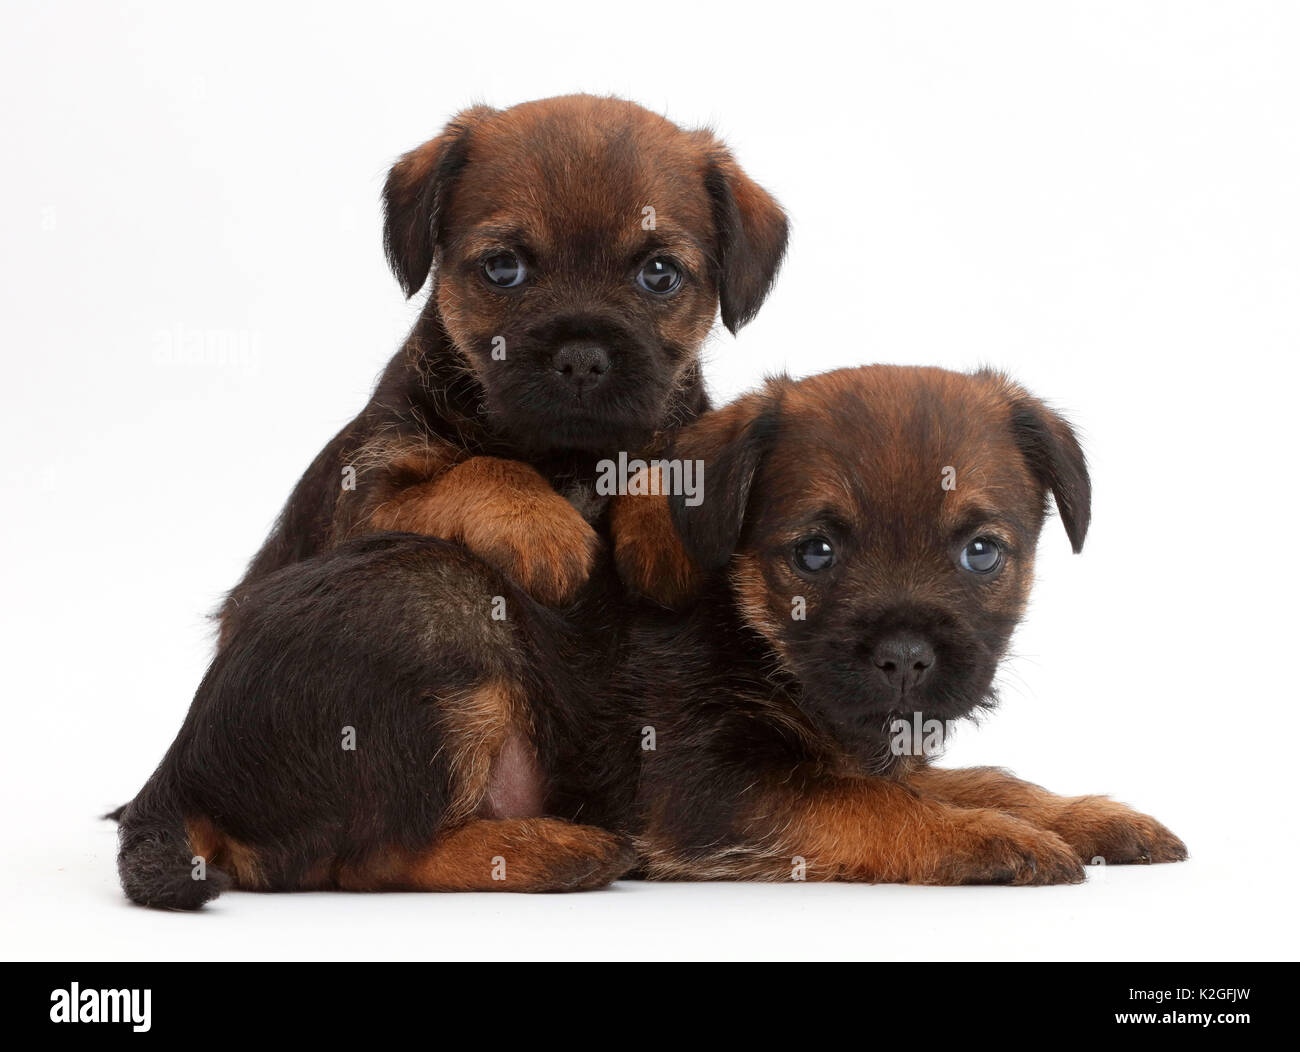 Border Terrier puppies, age 5 weeks. Stock Photo